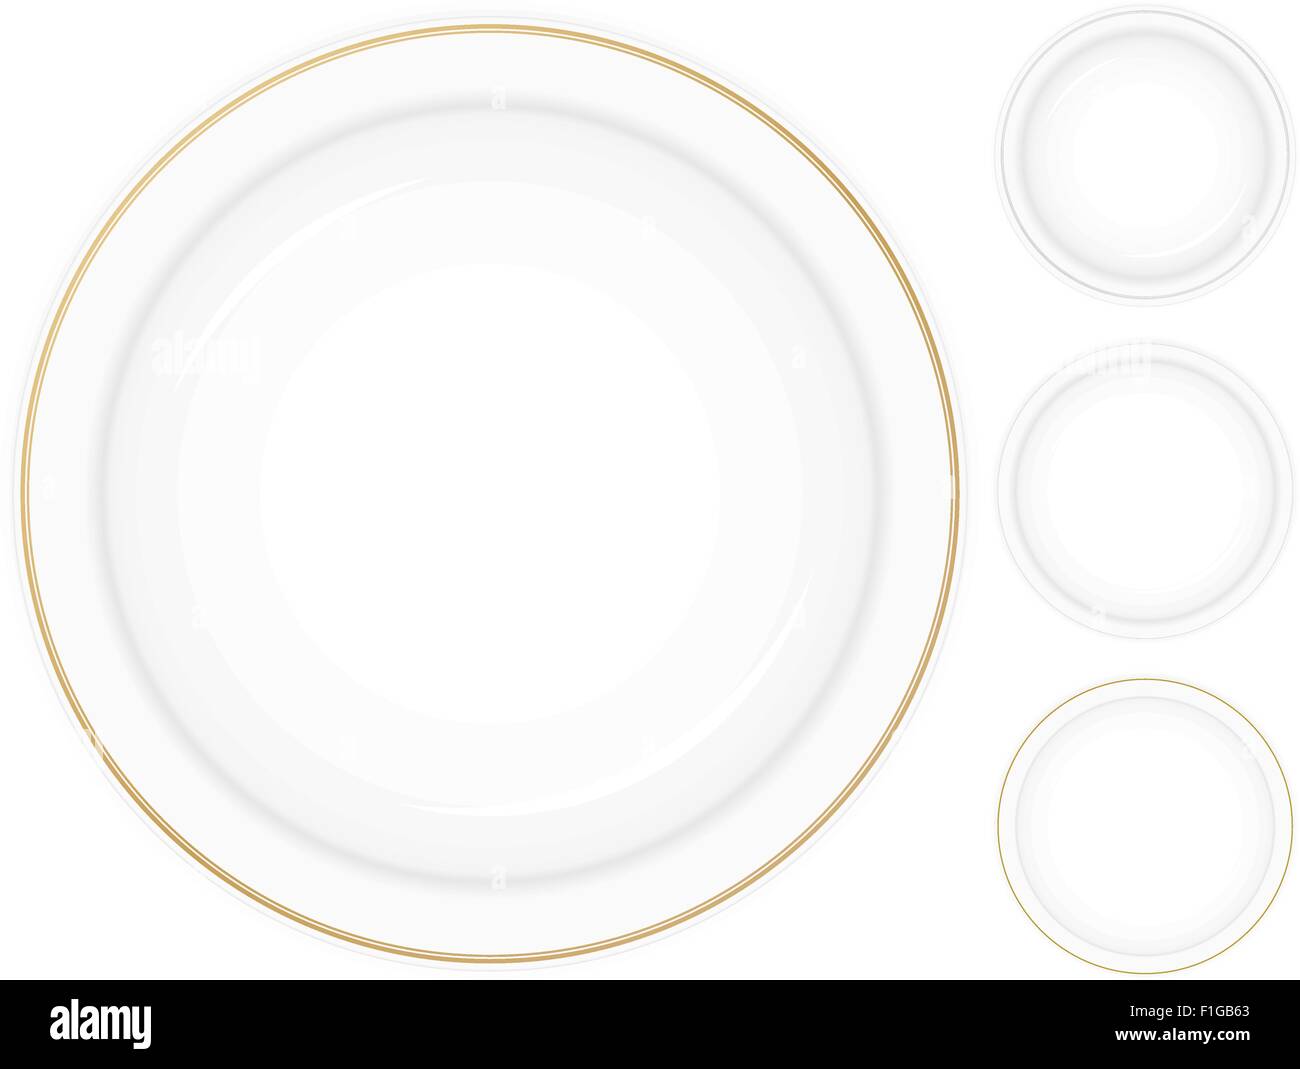 Empty plates on a white background. Vector illustration. Stock Vector